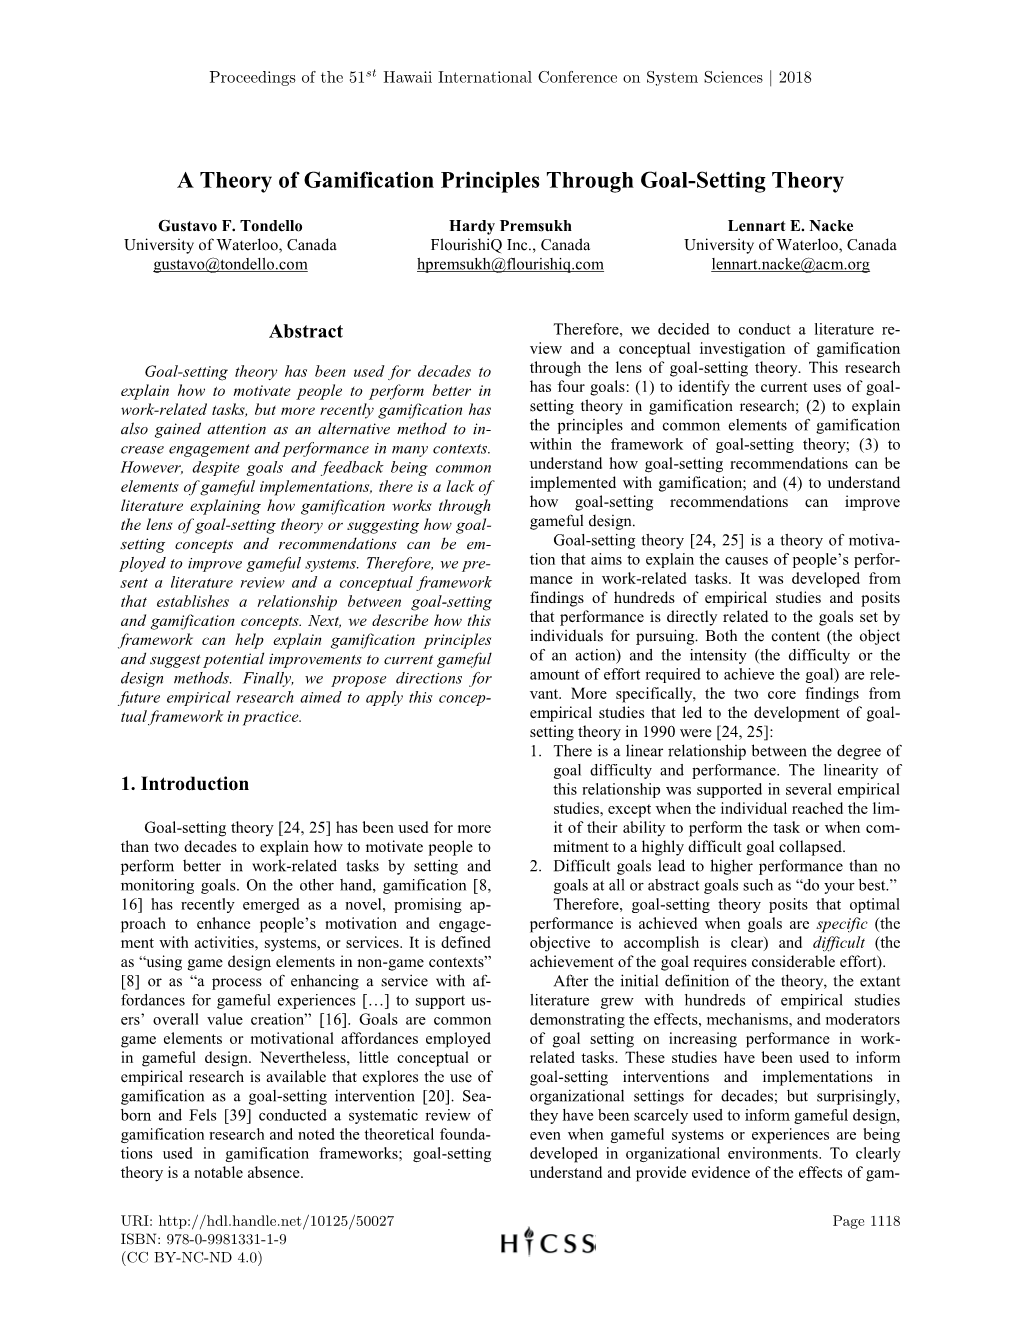 A Theory of Gamification Principles Through Goal Setting Theory